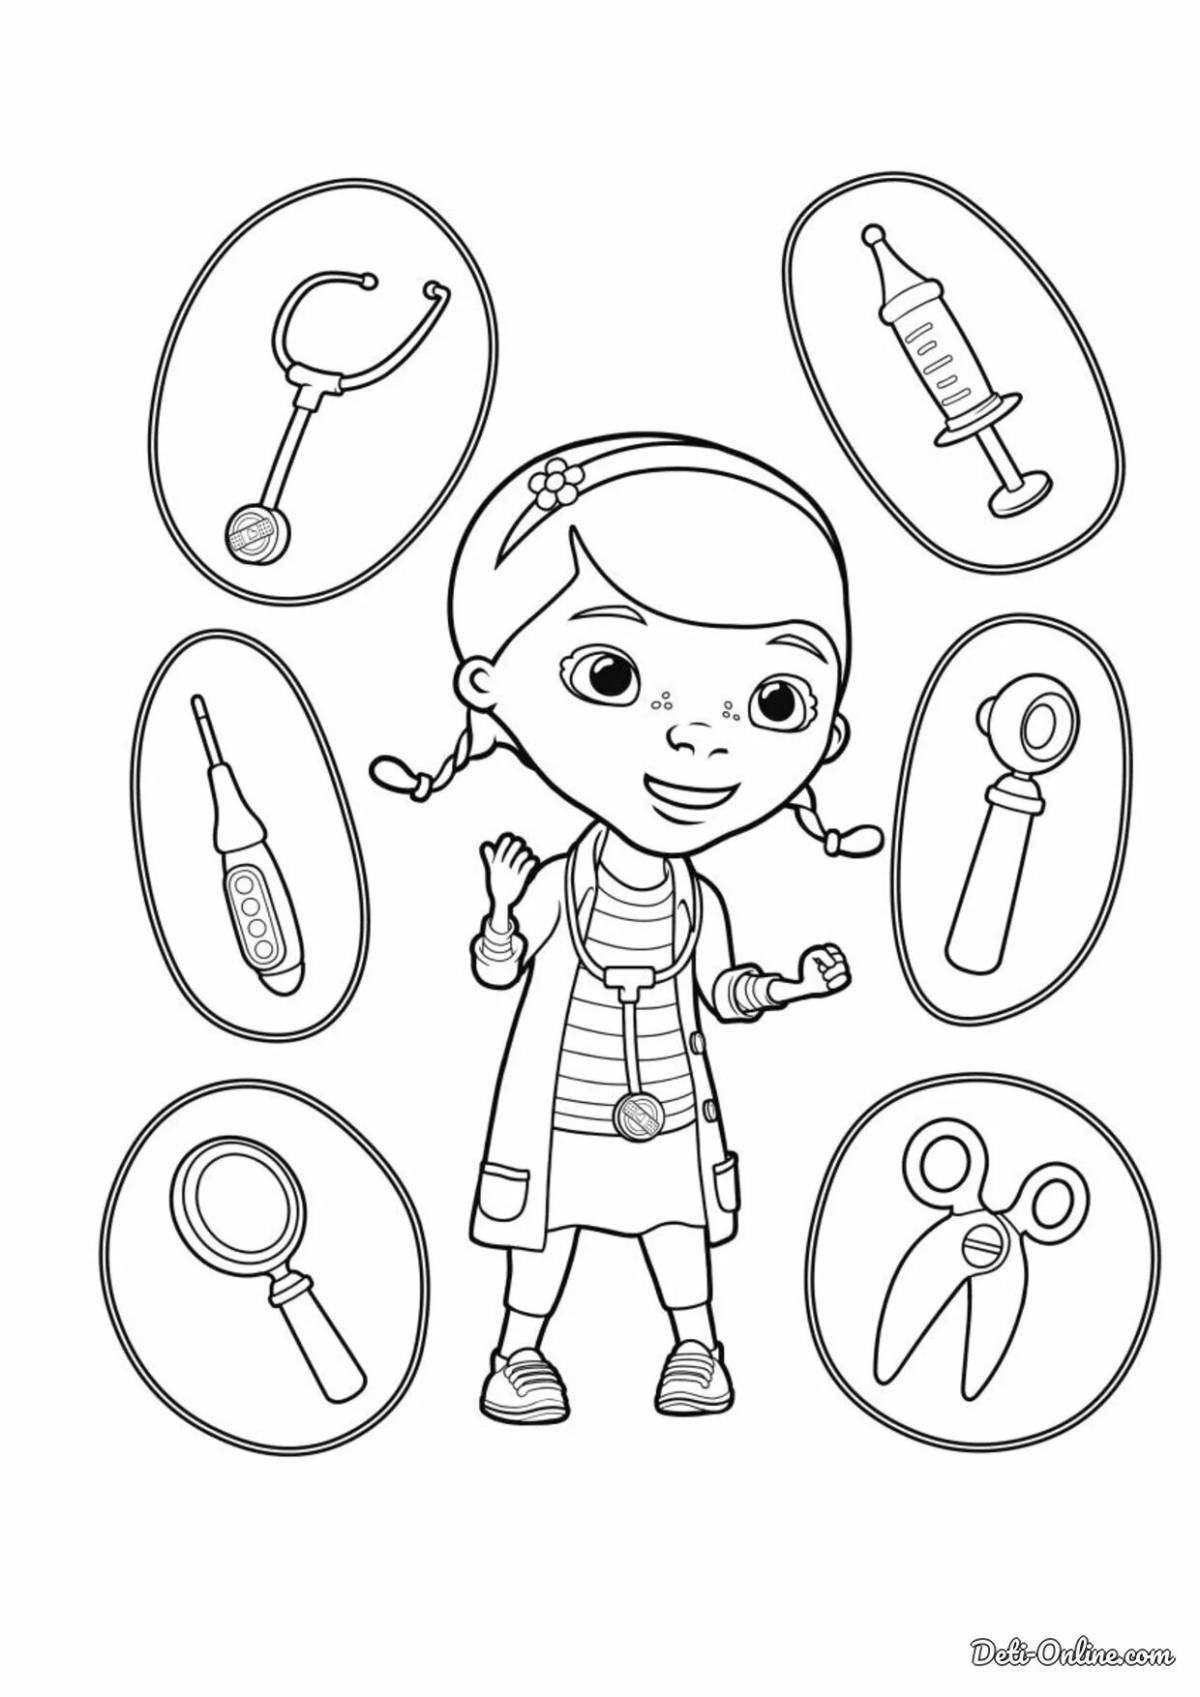 Doctor plush bright coloring book for kids